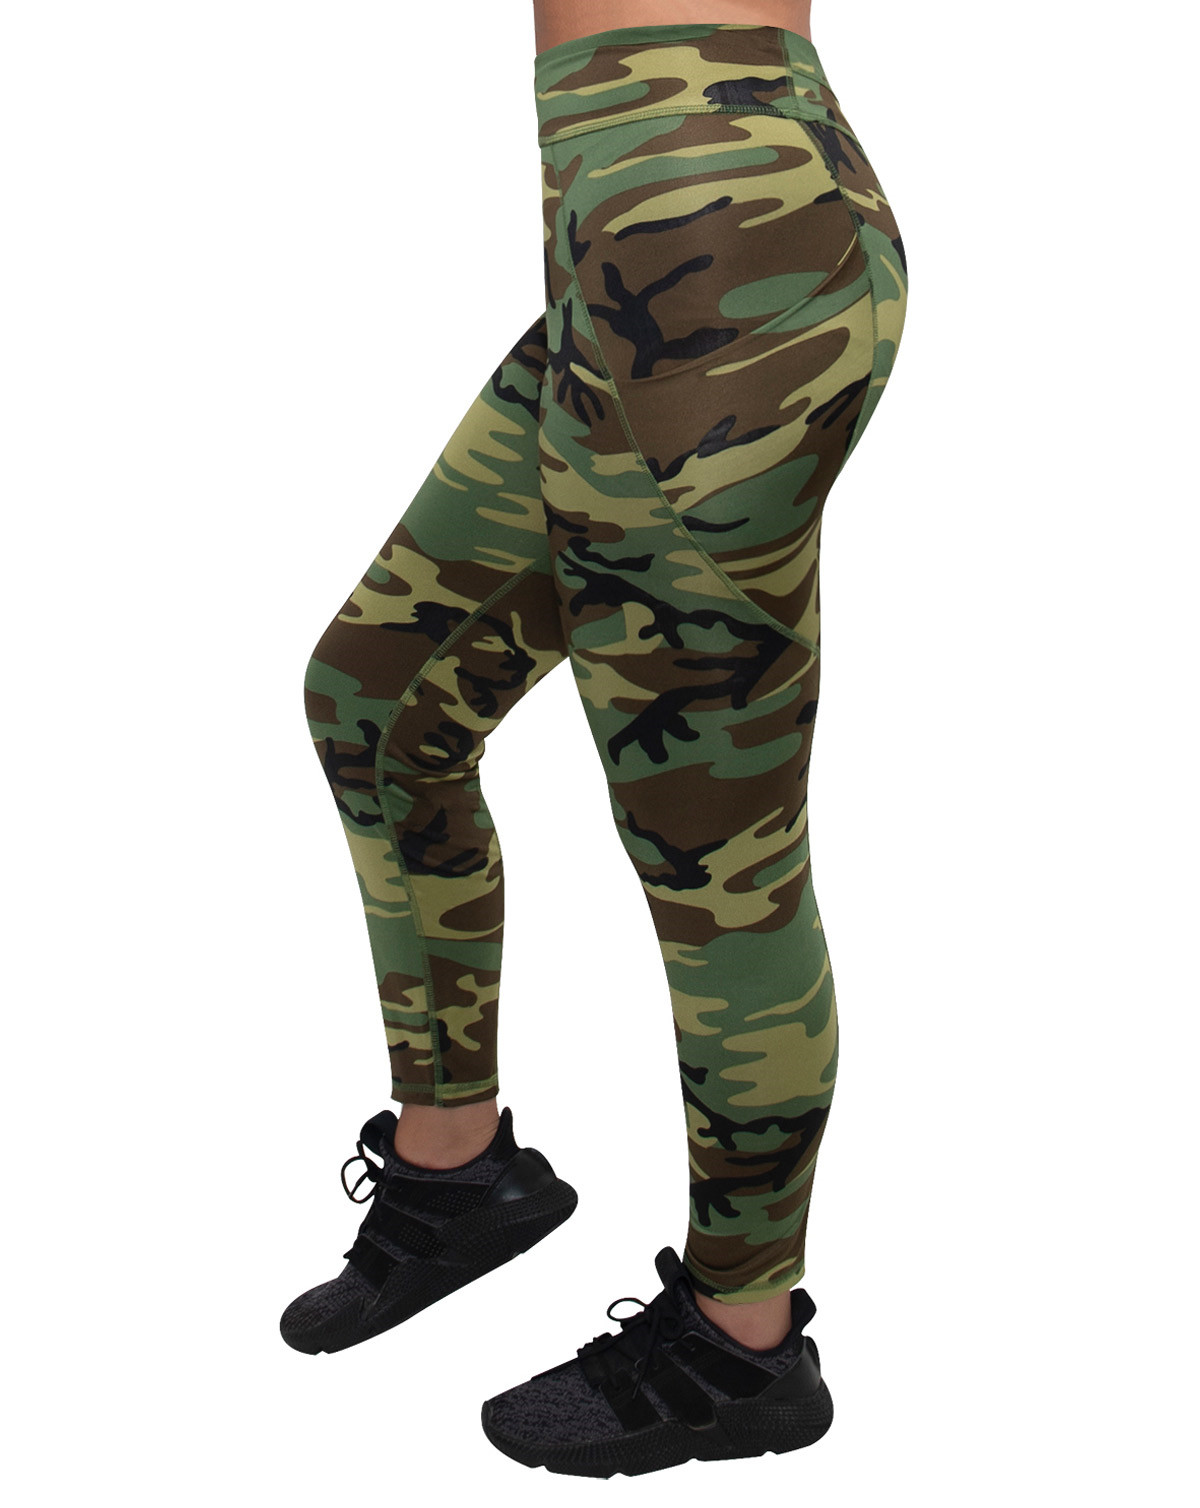 #3 - Rothco Womens Workout Performance Camo Leggings With Pockets (Woodland, XS)